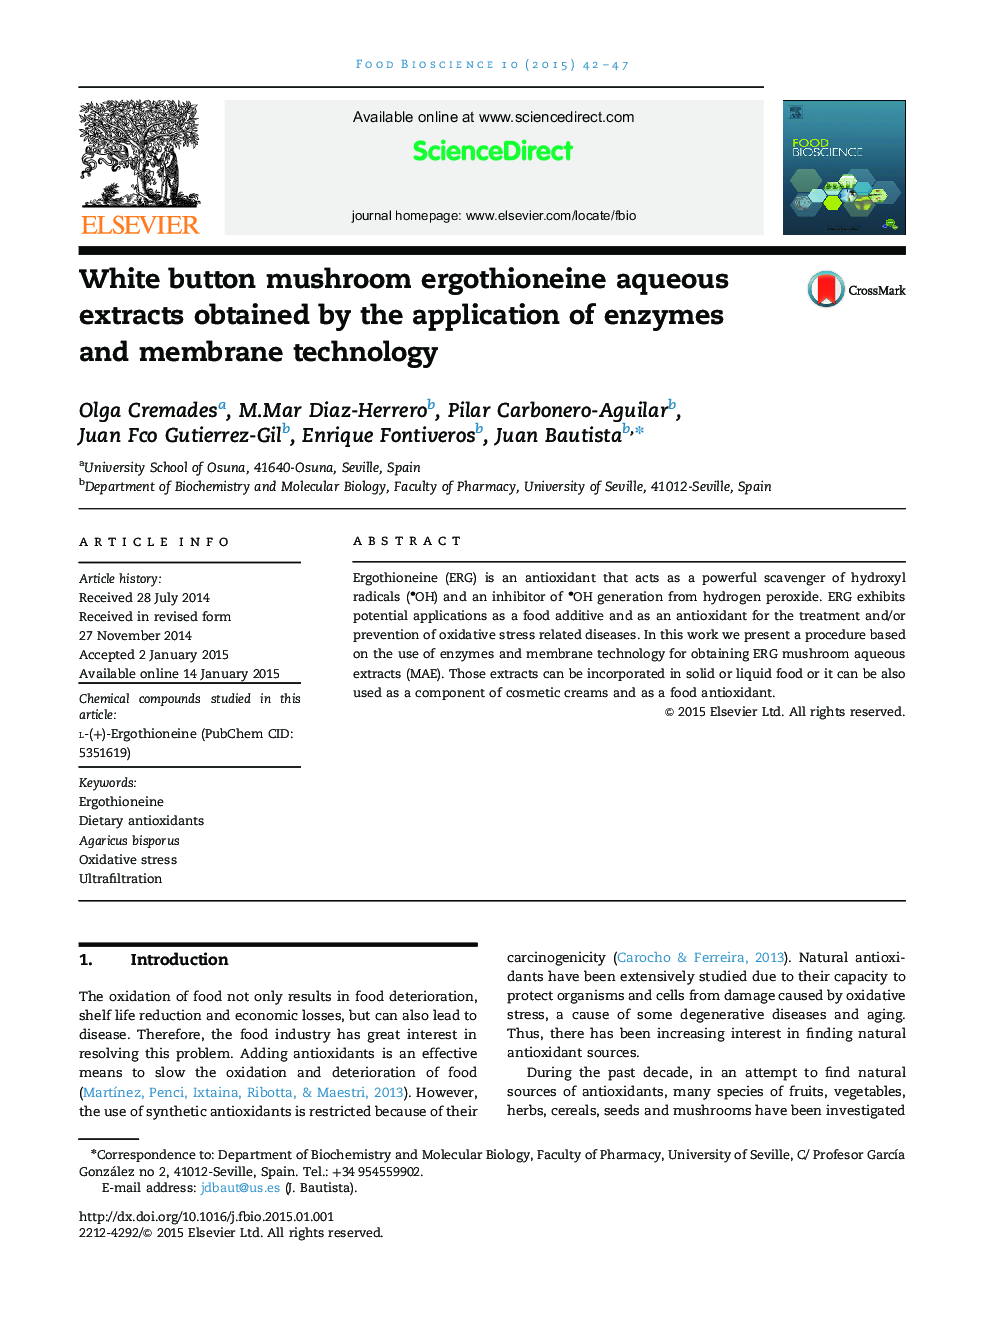 White button mushroom ergothioneine aqueous extracts obtained by the application of enzymes and membrane technology